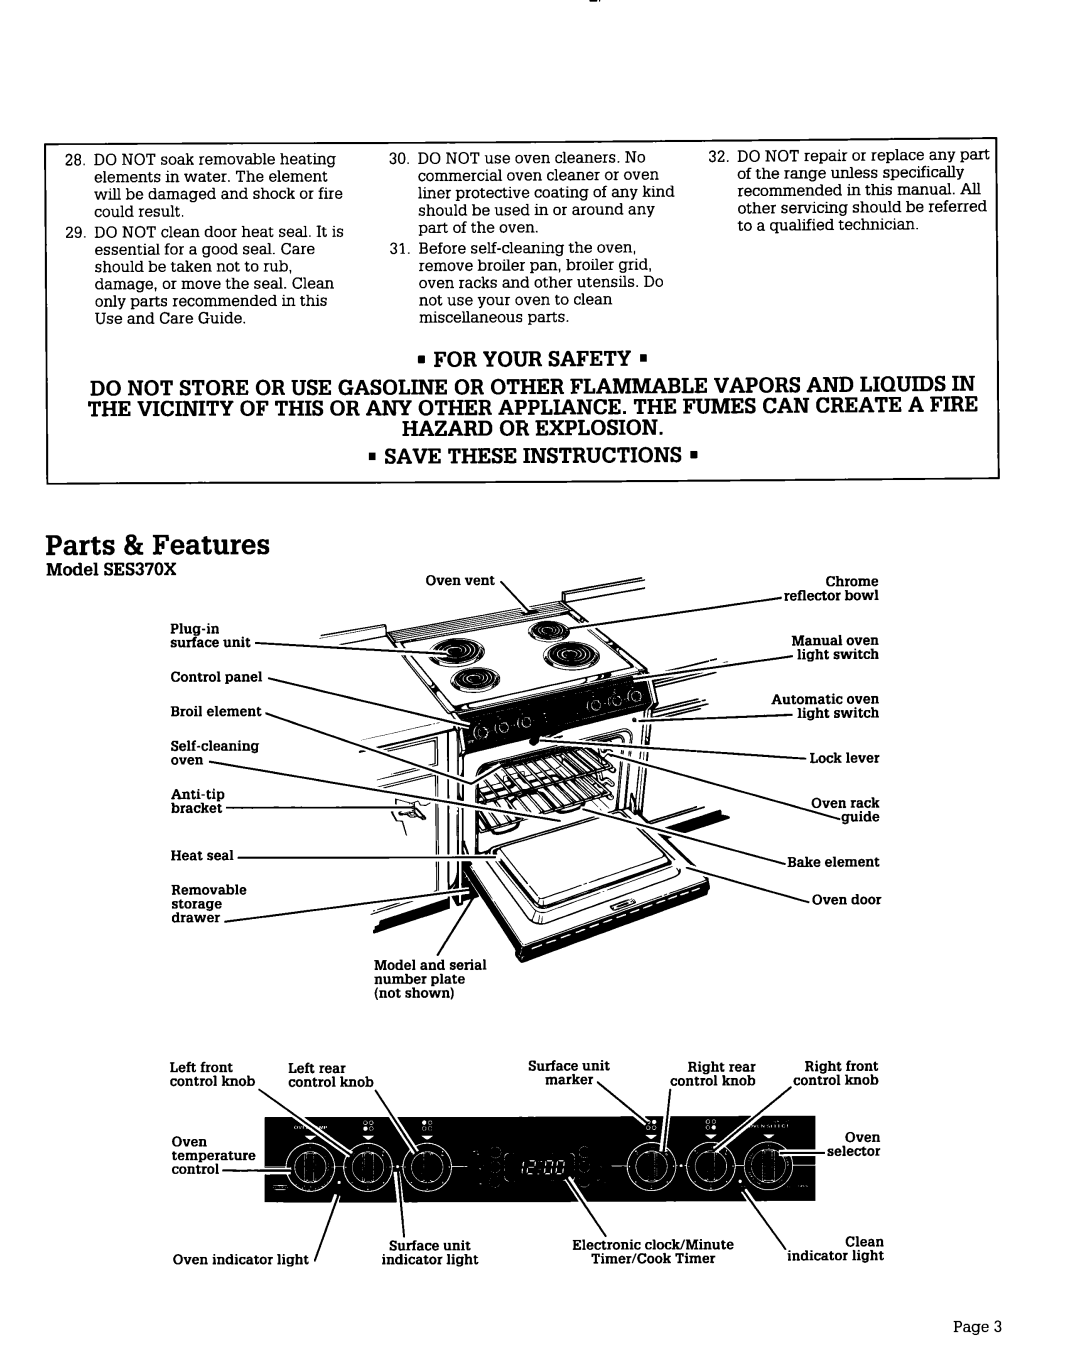 Whirlpool SES370X warranty Parts 81Features, For Your Safety, Save These Instructions 